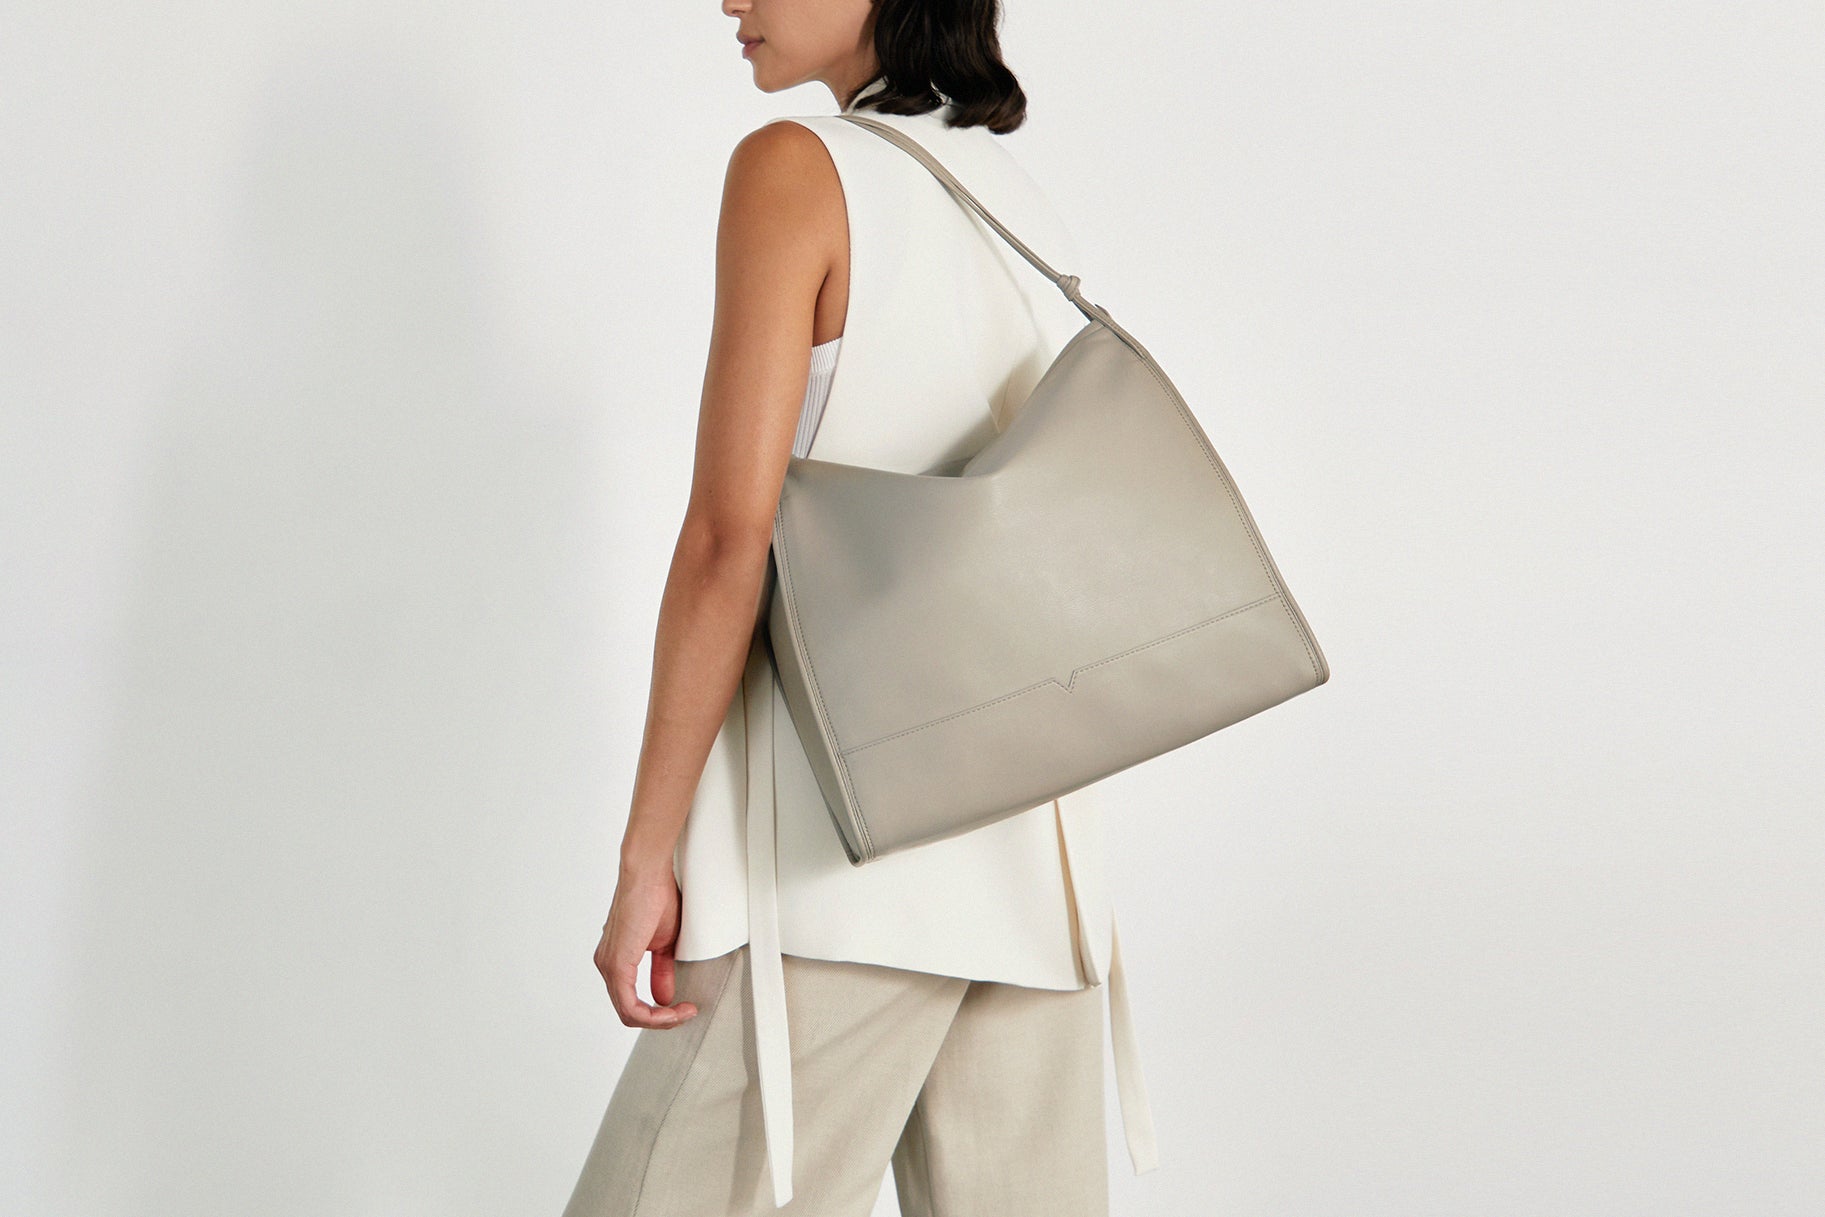 The Shoulder Bag in Banbū Leather in Stone image 2